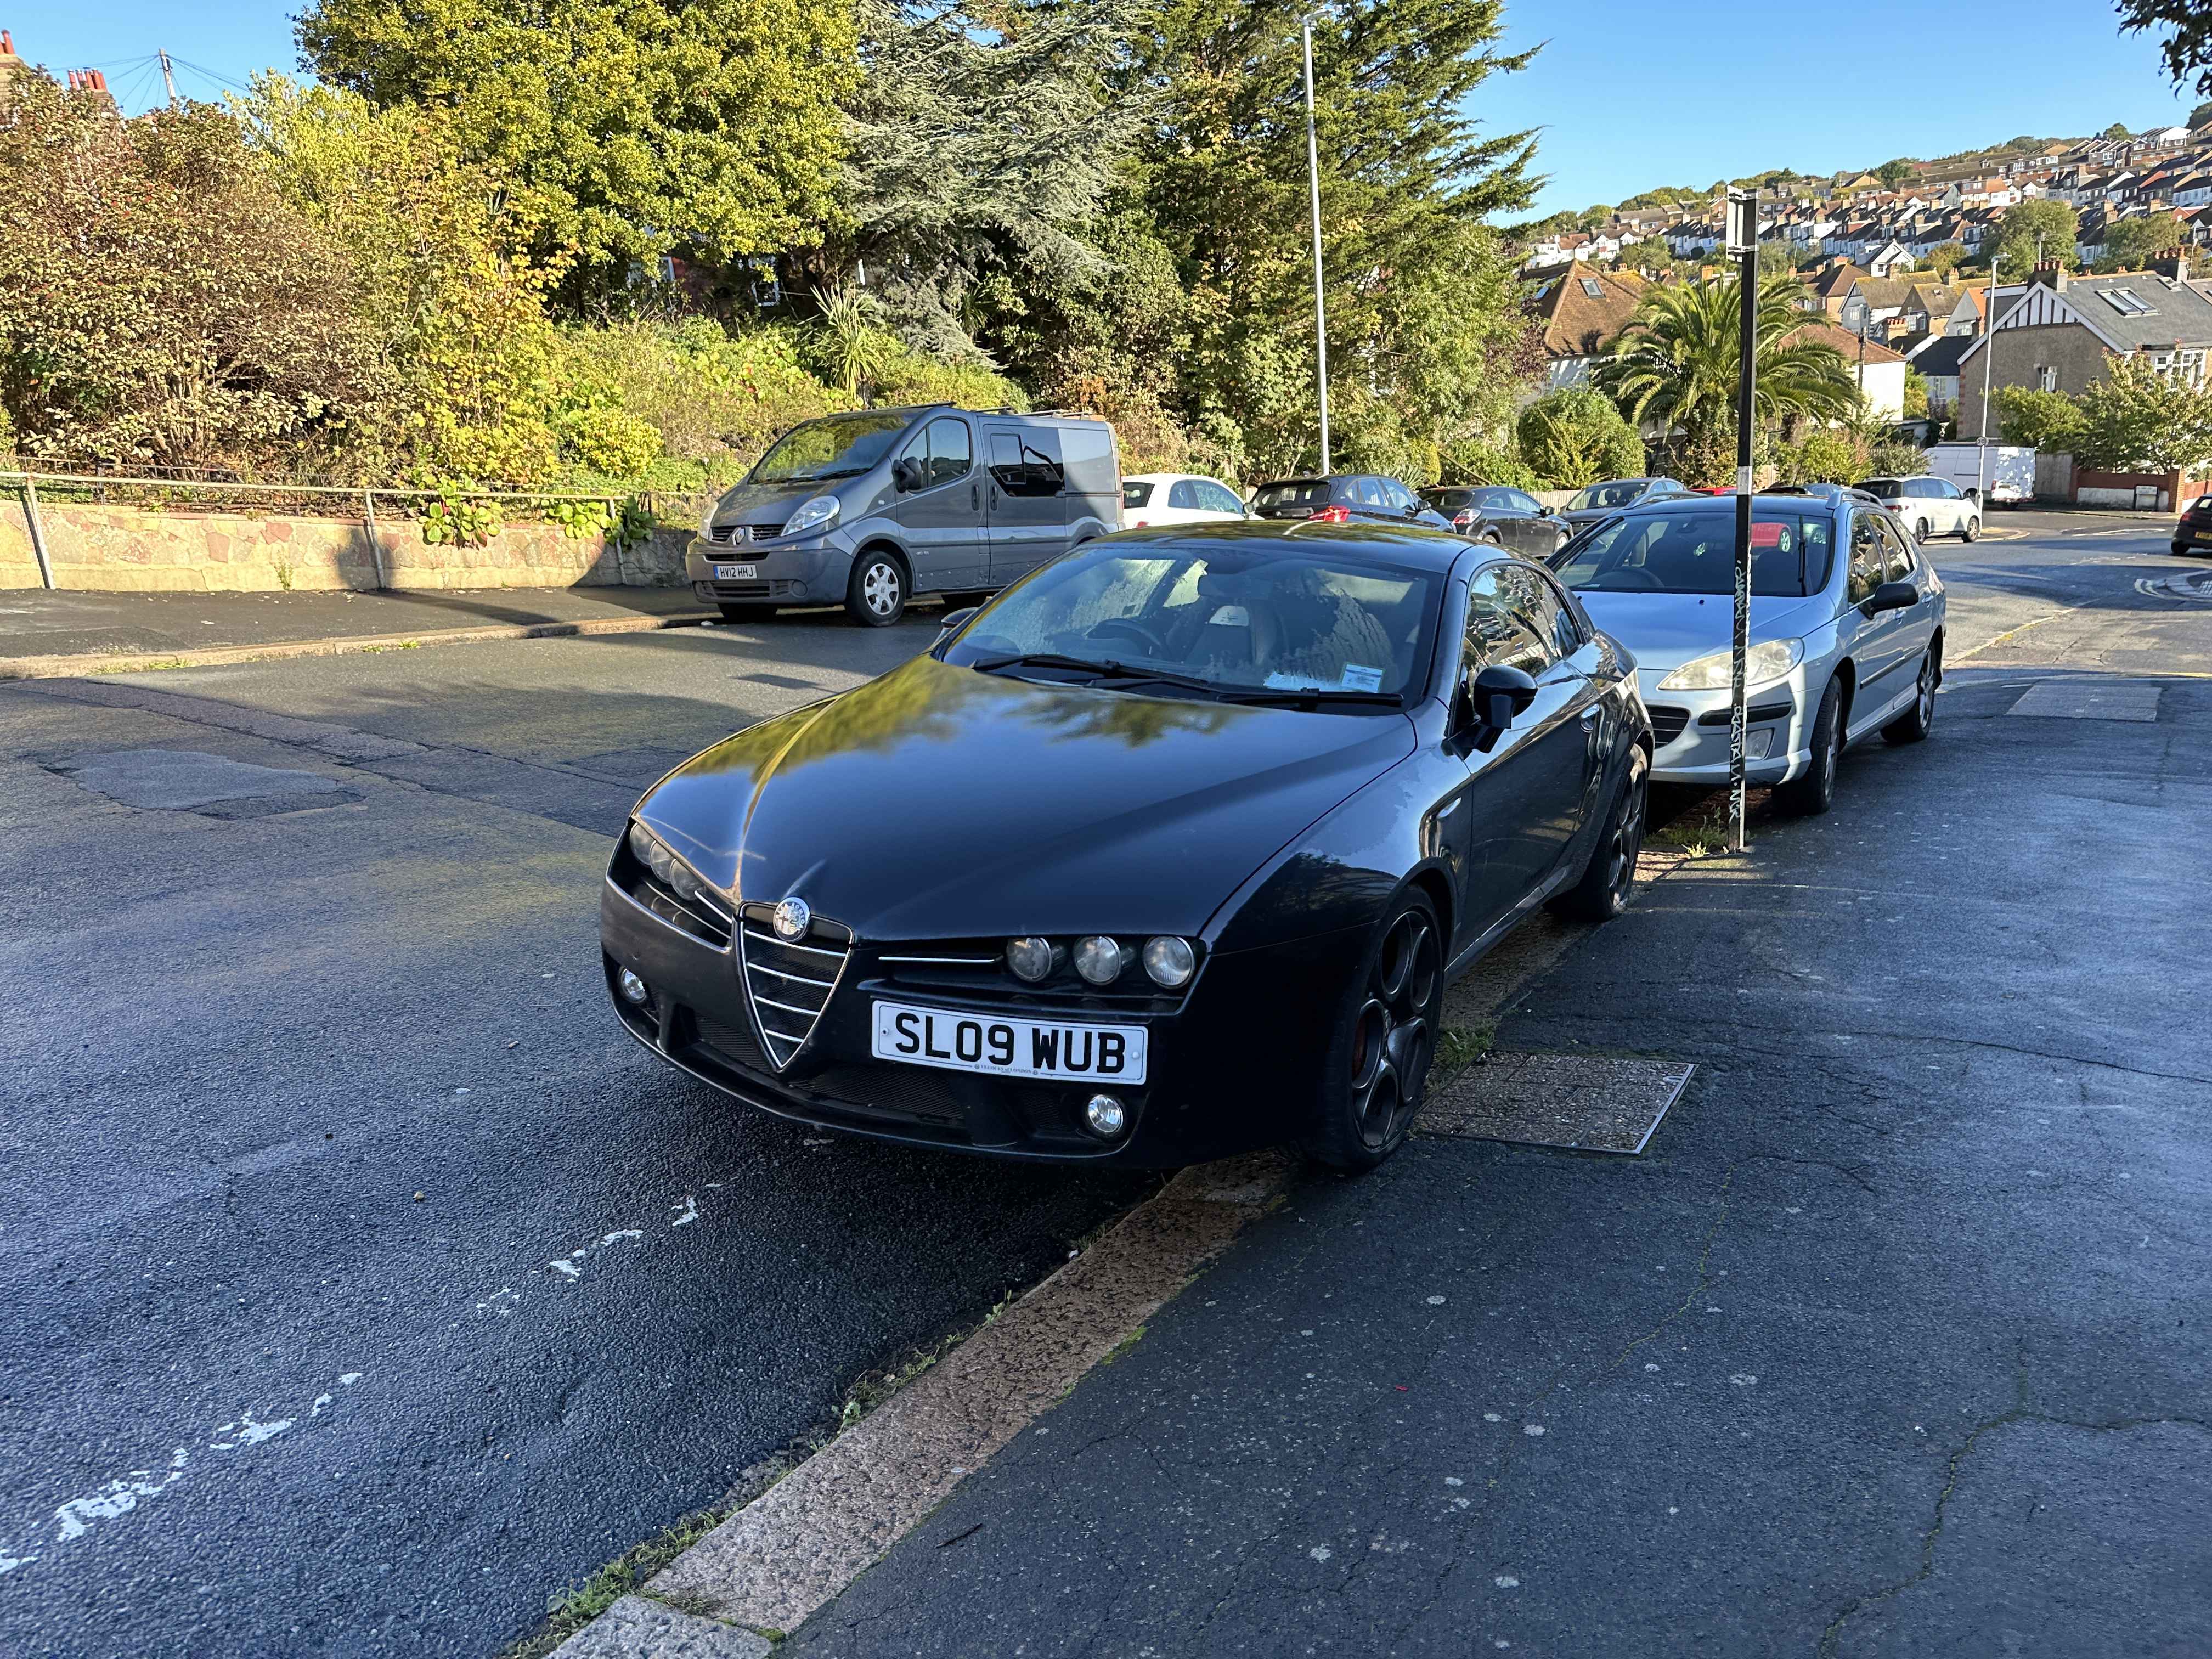 Photograph of SL09 WUB - a Black Alfa Romeo Brera parked in Hollingdean by a non-resident. The fifth of twenty photographs supplied by the residents of Hollingdean.